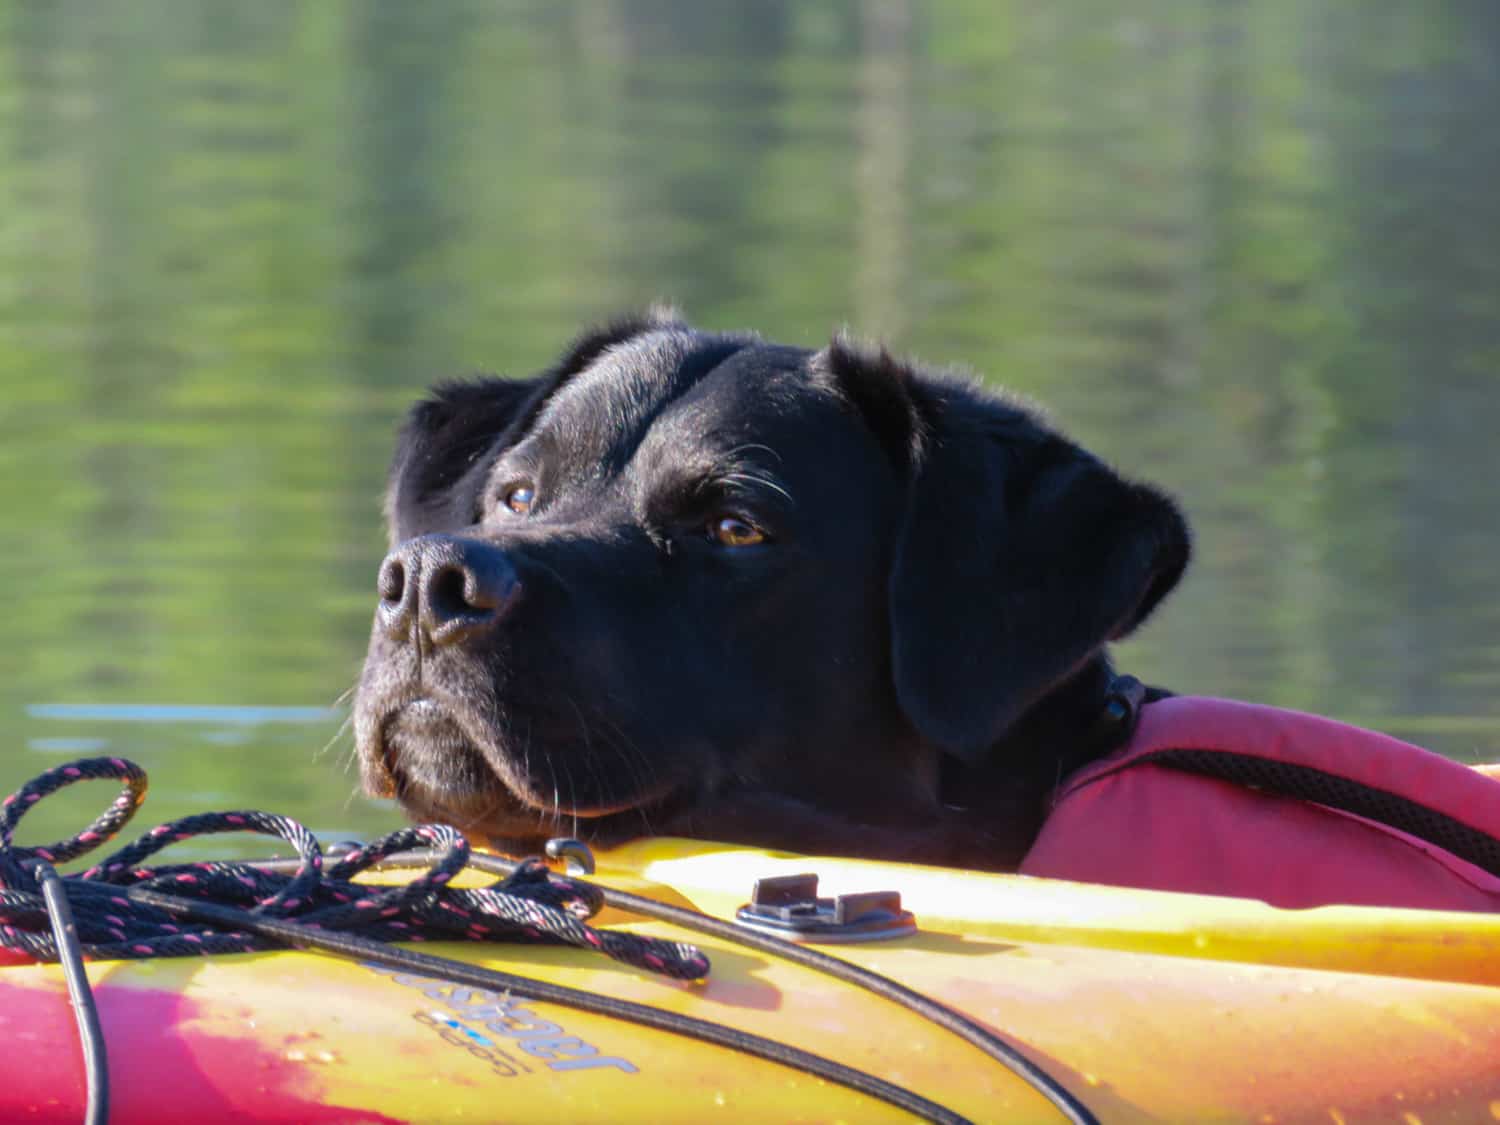 Tips for Canoeing or Kayaking with Dogs - Plan a Safe and Fun Adventure